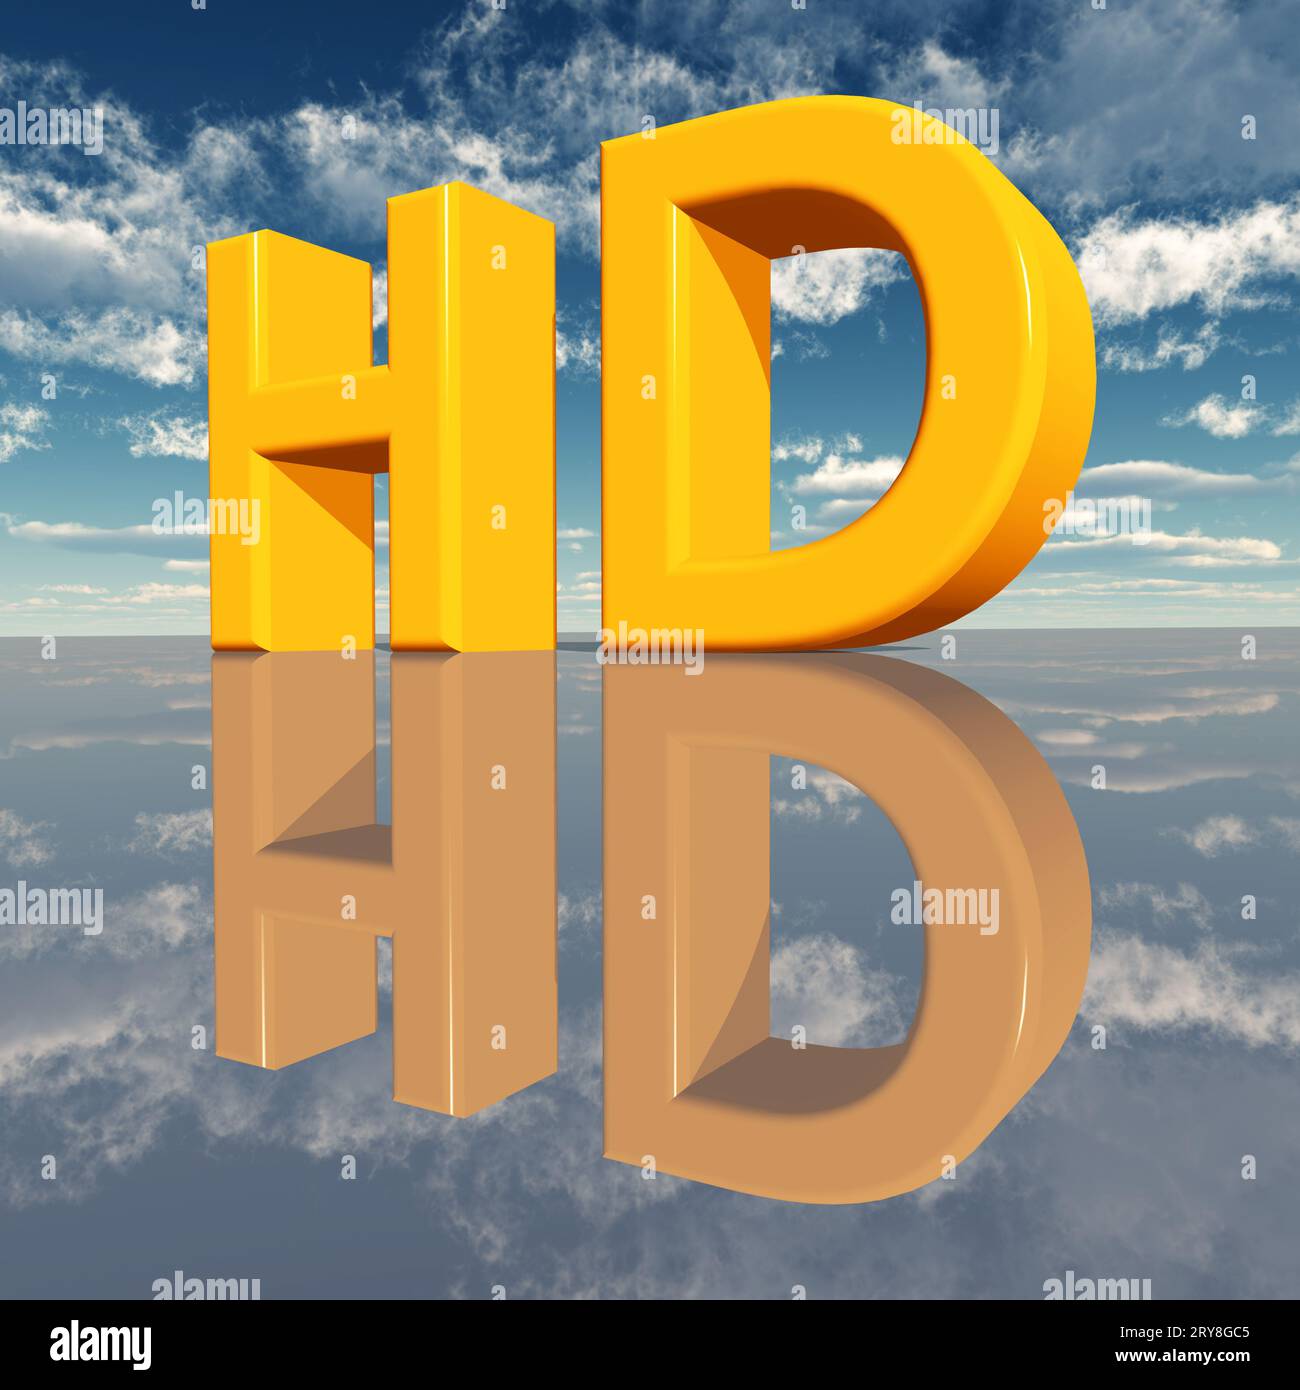 HD - High Definition Stock Photo